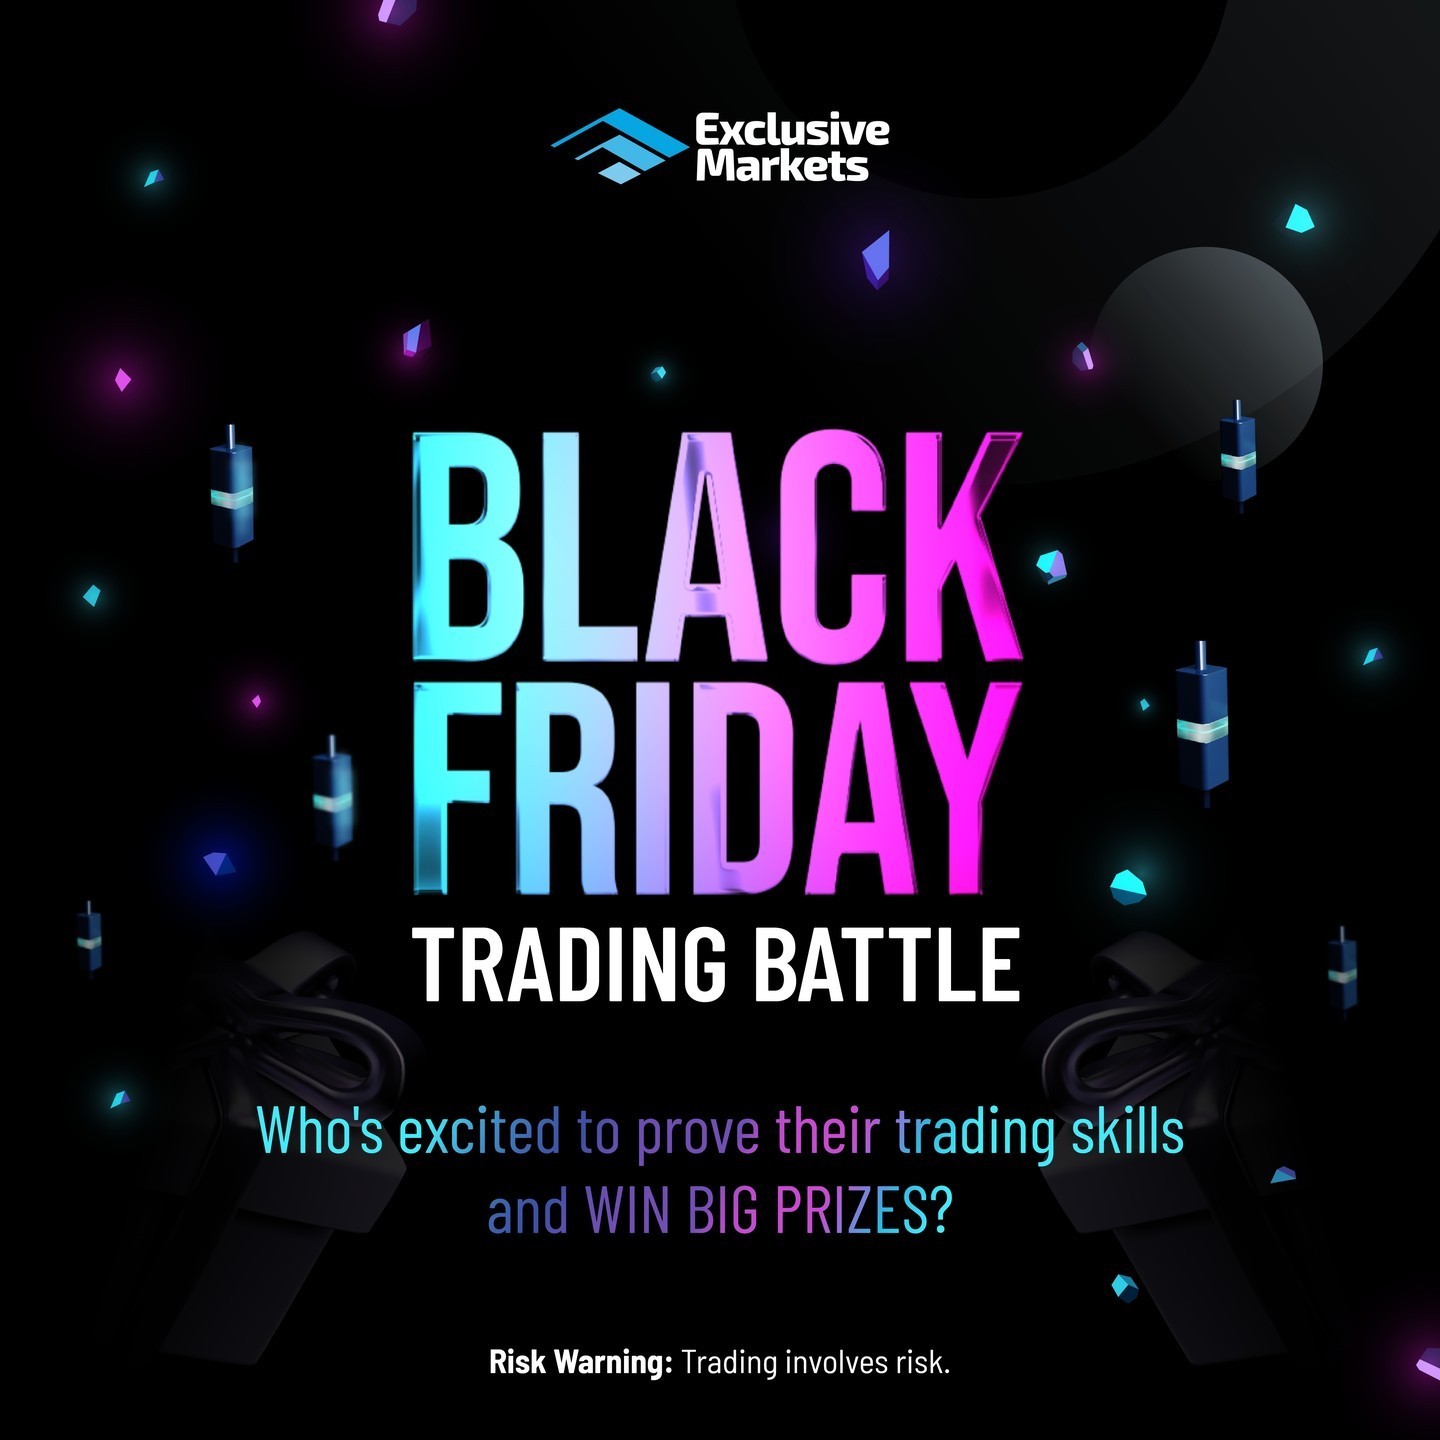 Black Friday Trading Battle | Exclusive Markets